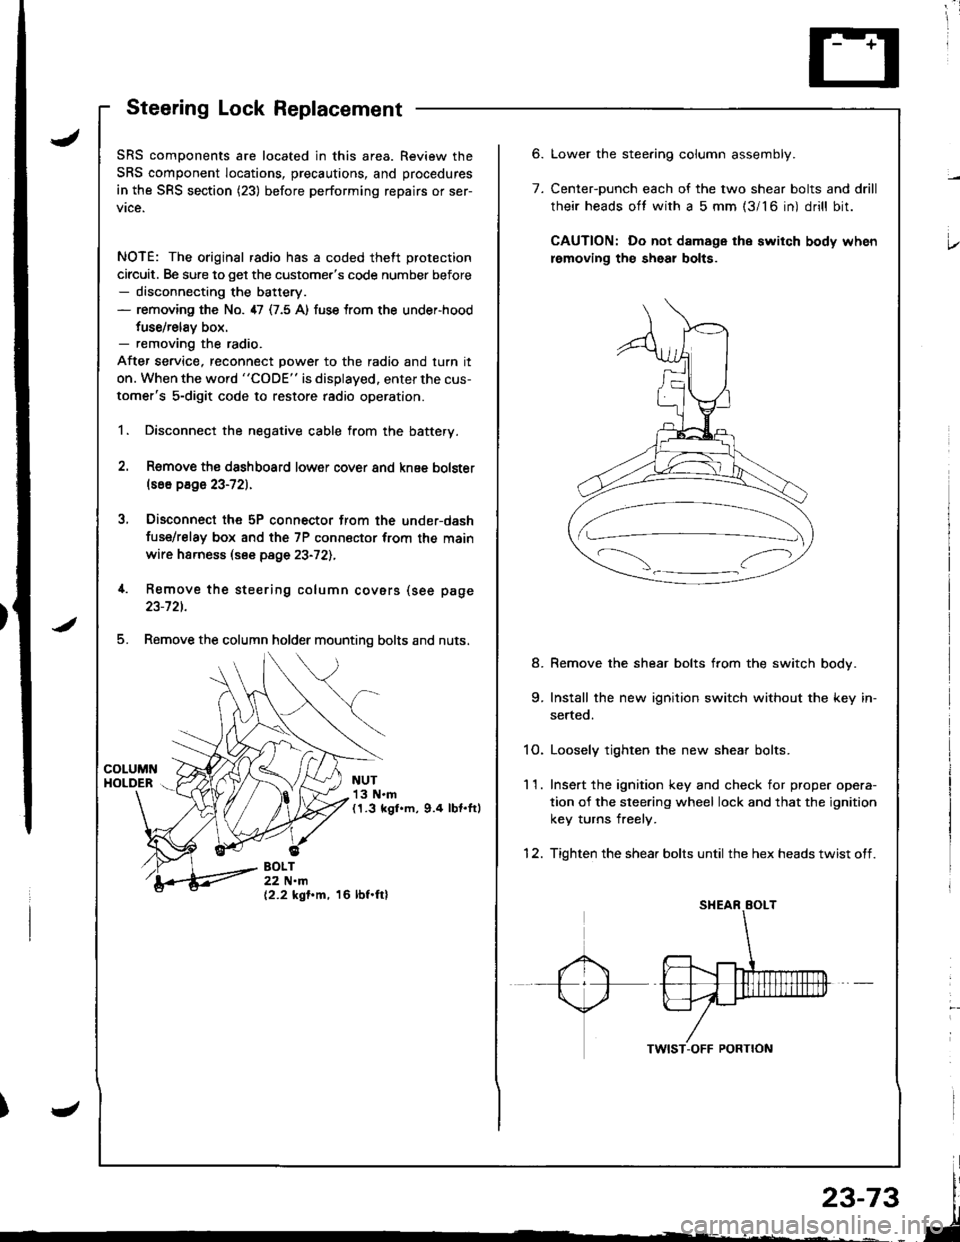 ACURA INTEGRA 1998  Service Repair Manual ;
Steering Lock Replacement
SRS components are located in this area. Review the
SRS component locations, precautions, and procedures
in the SRS section (23) before performing repairs or ser-
vice.
NOT